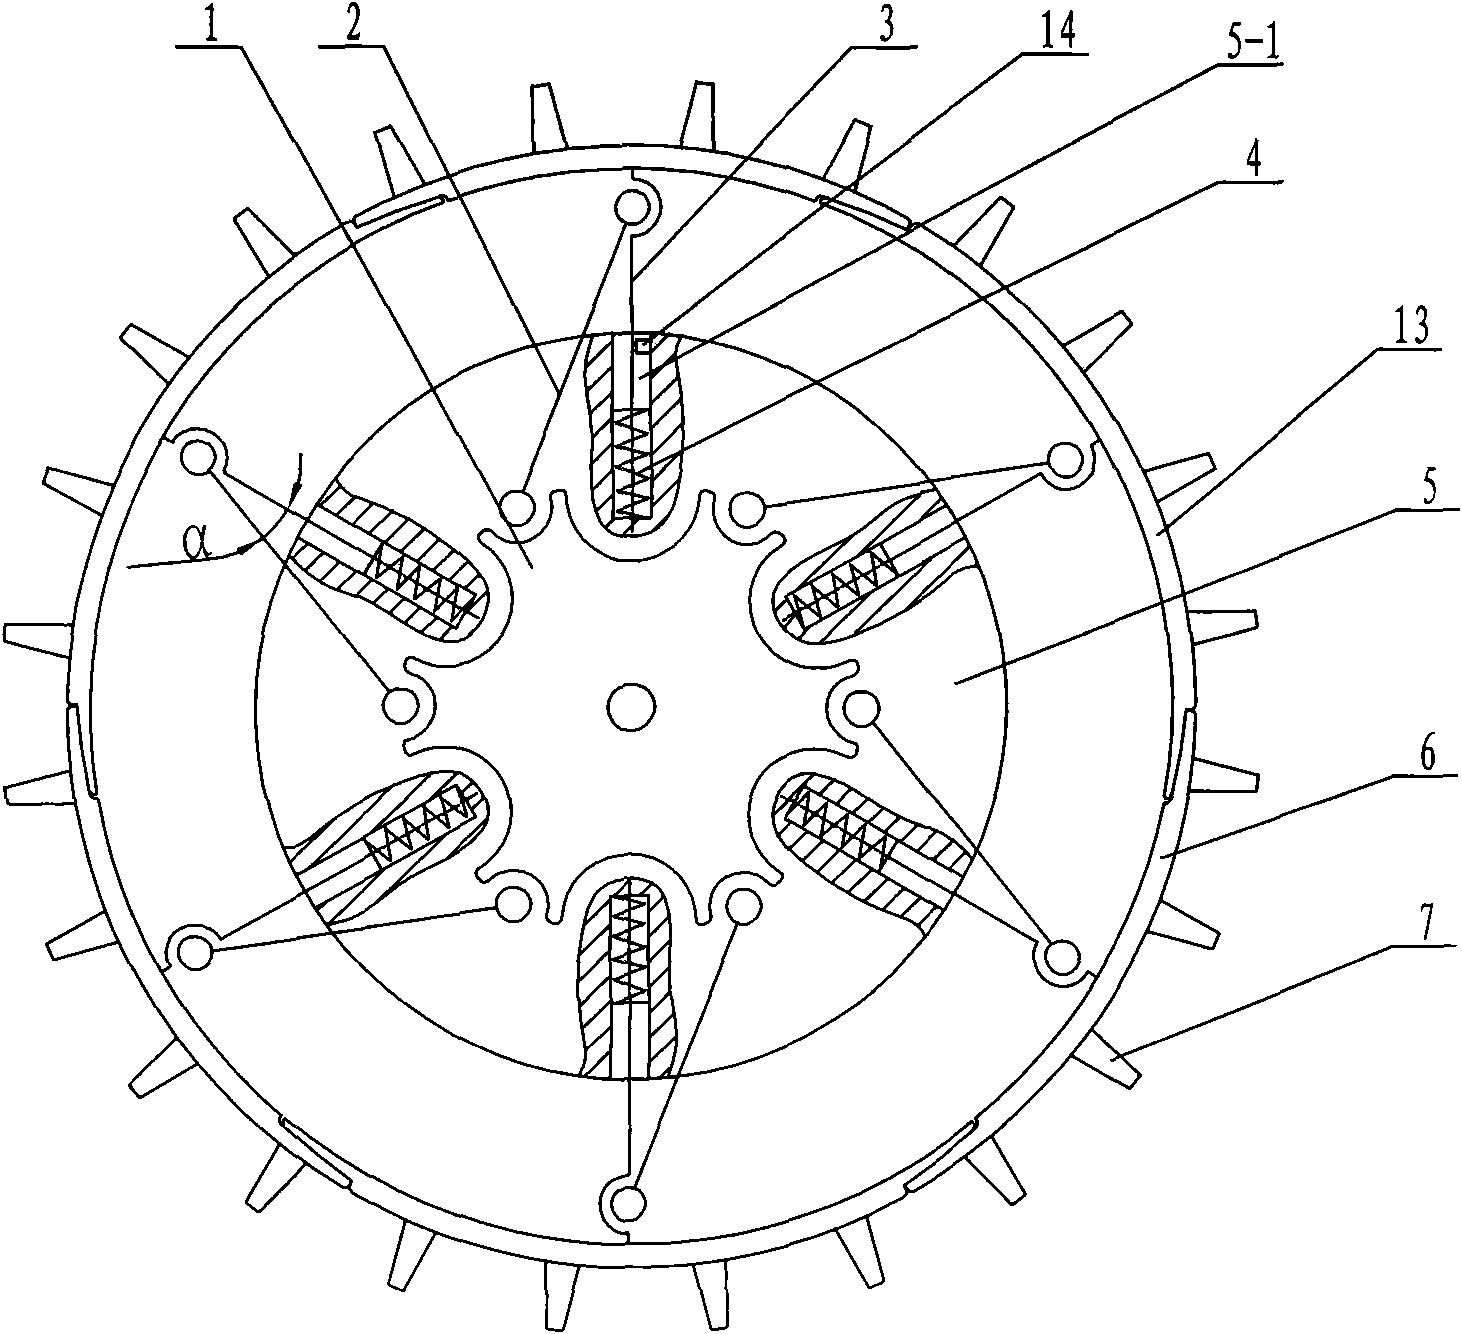 Probe vehicle wheel with variable diameter elastically capable of automatic extension